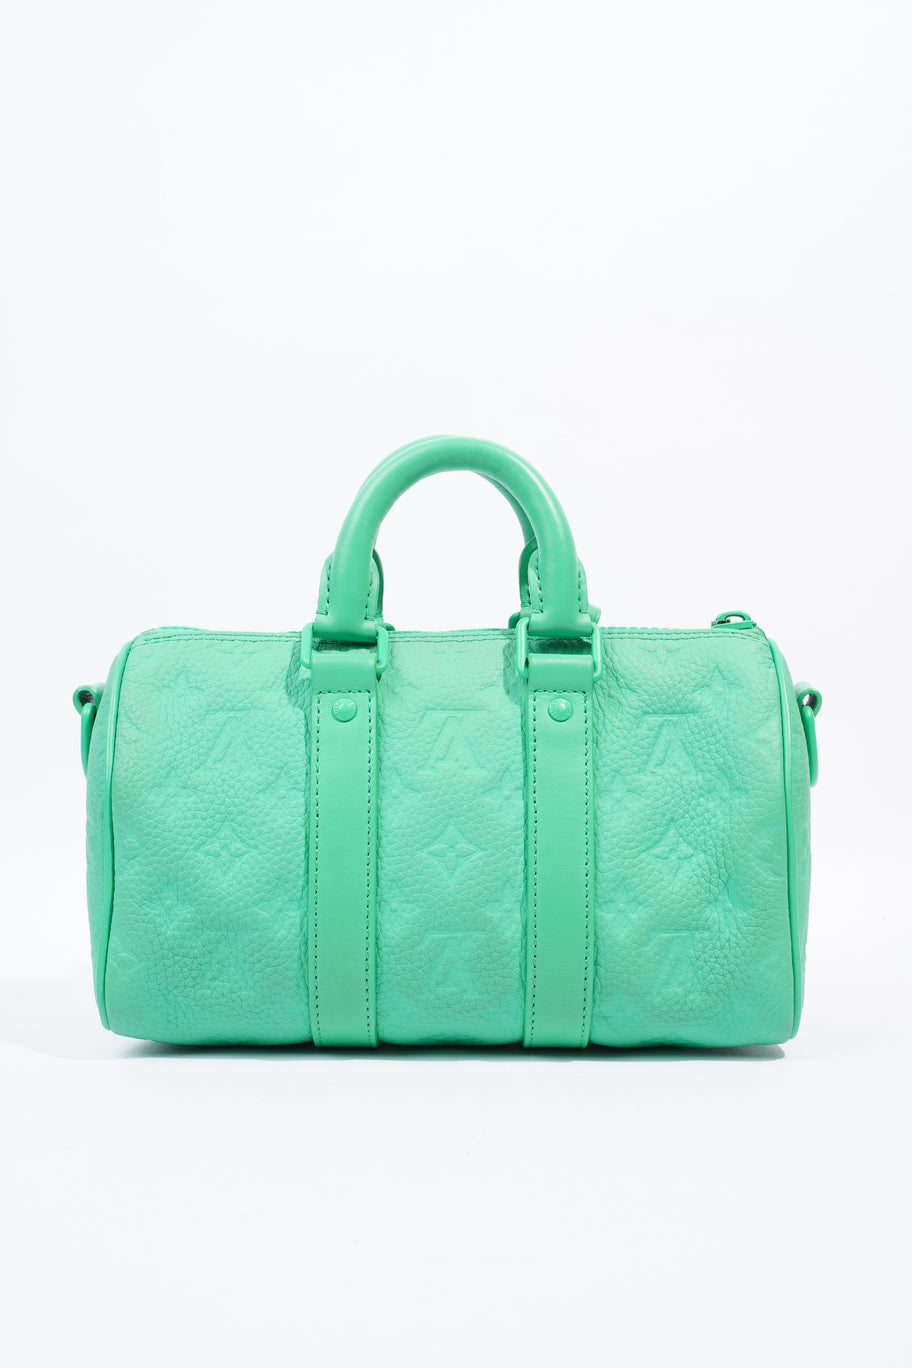 Keepall Bandouliere 25 Green Monogram Embossed Leather Image 8